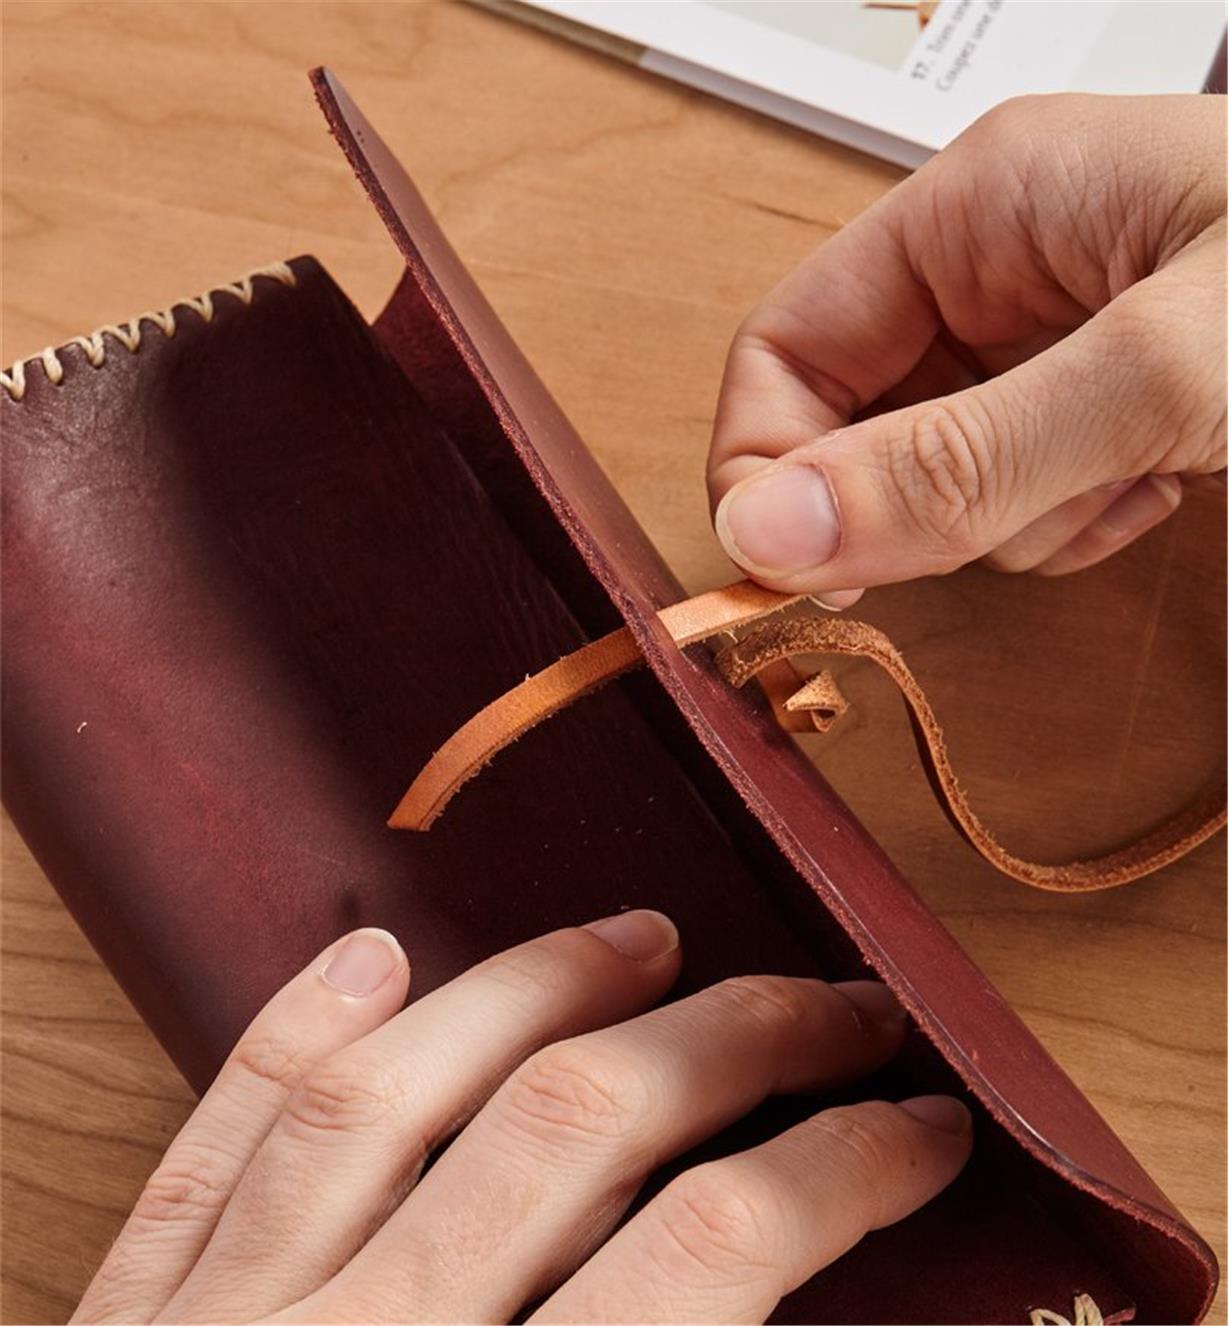 Feeding the leather cord through an opening in the leather case 